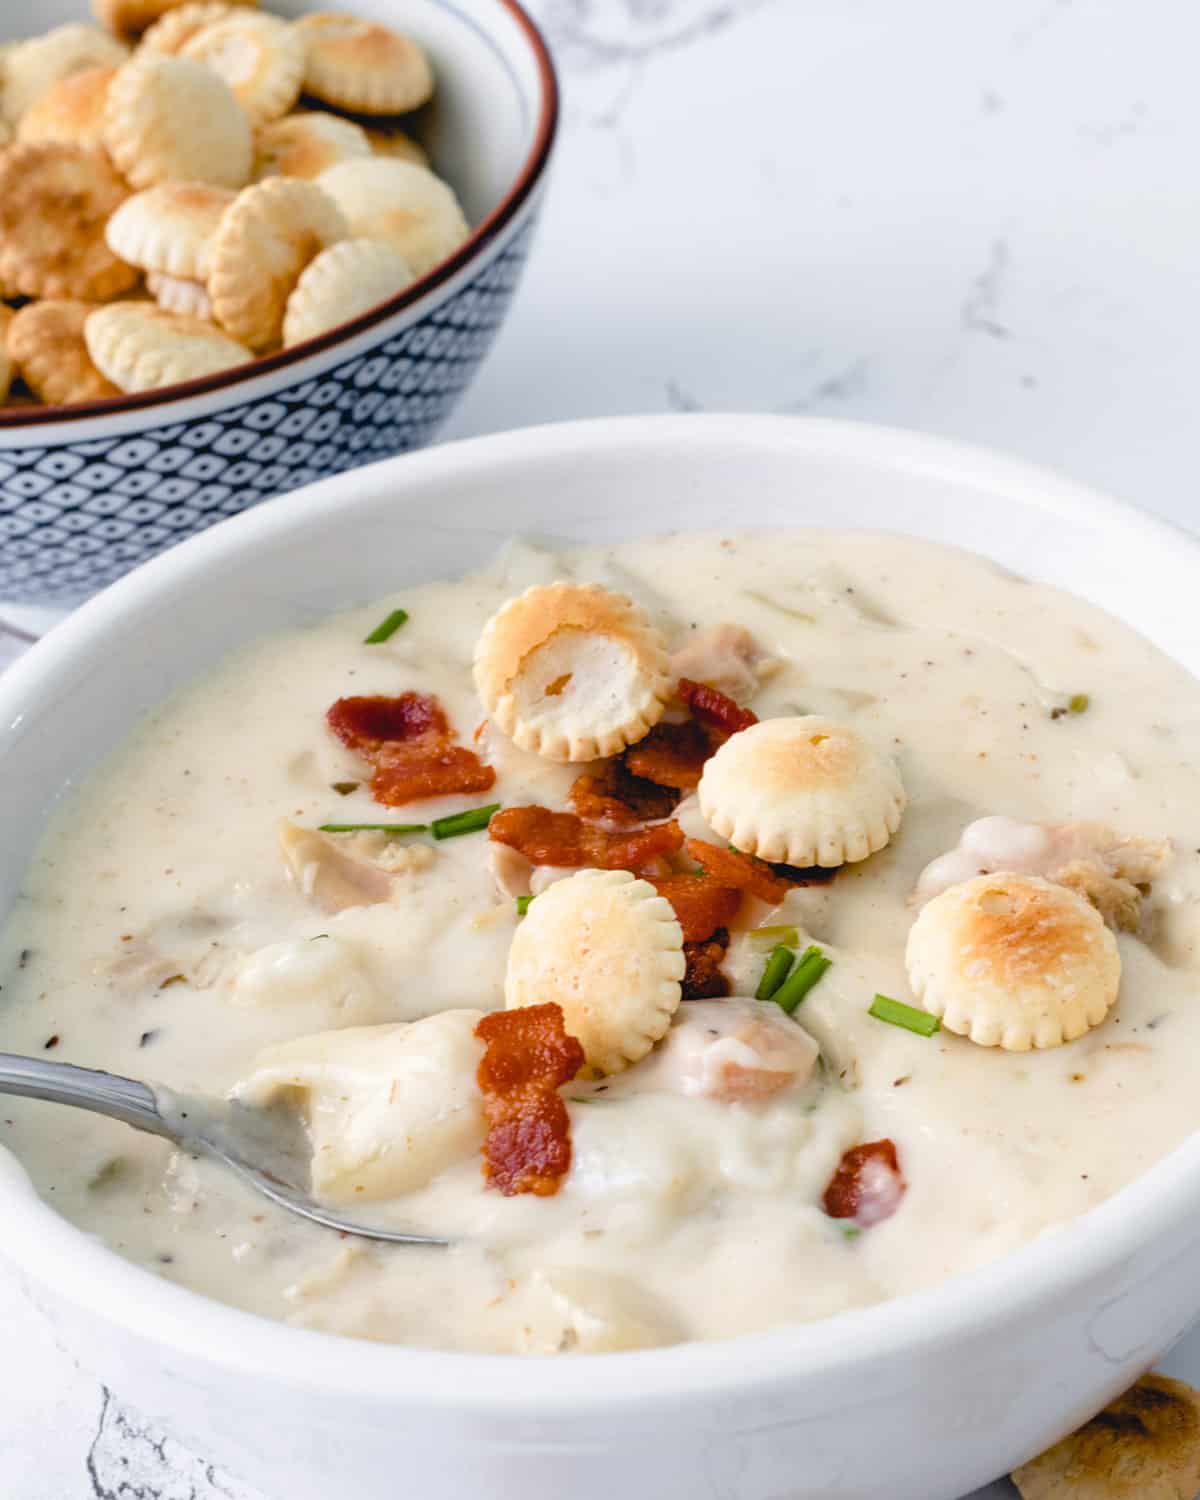 Bowl of Boston Clam Chowder with all of the toppings. A spoon dipped into the bowl.